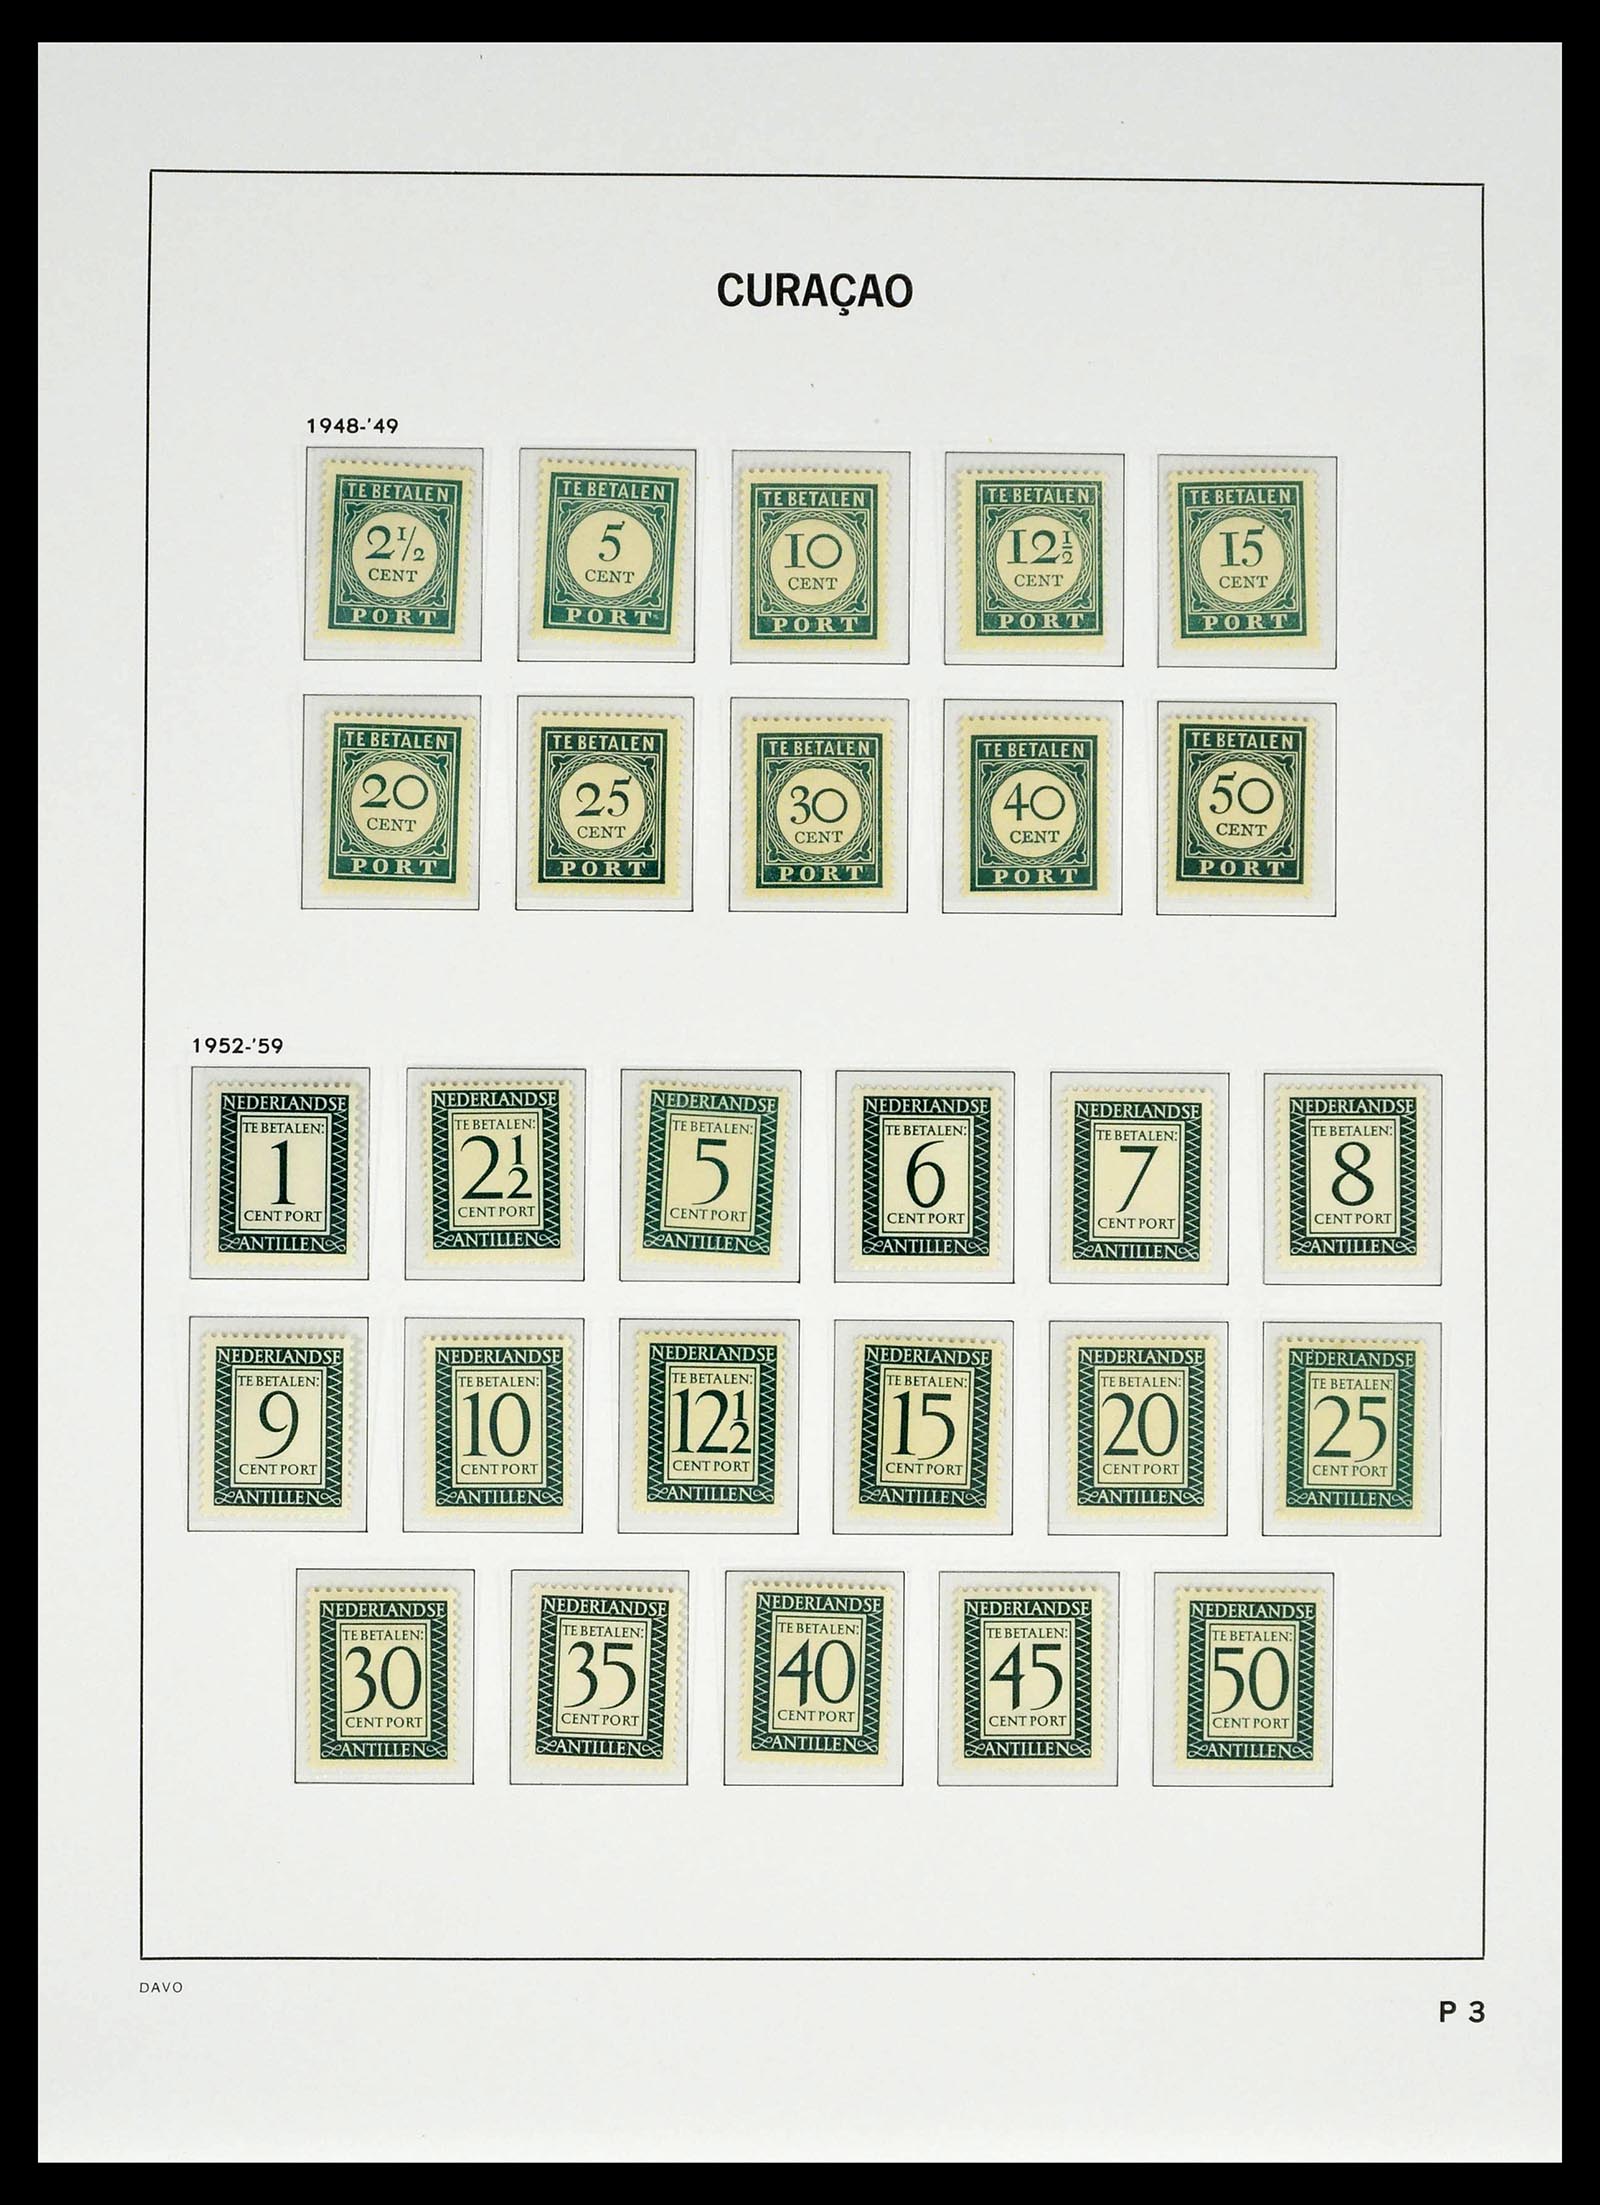 39360 0263 - Stamp collection 39360 Curaçao/Antilles complete 1873-2013.